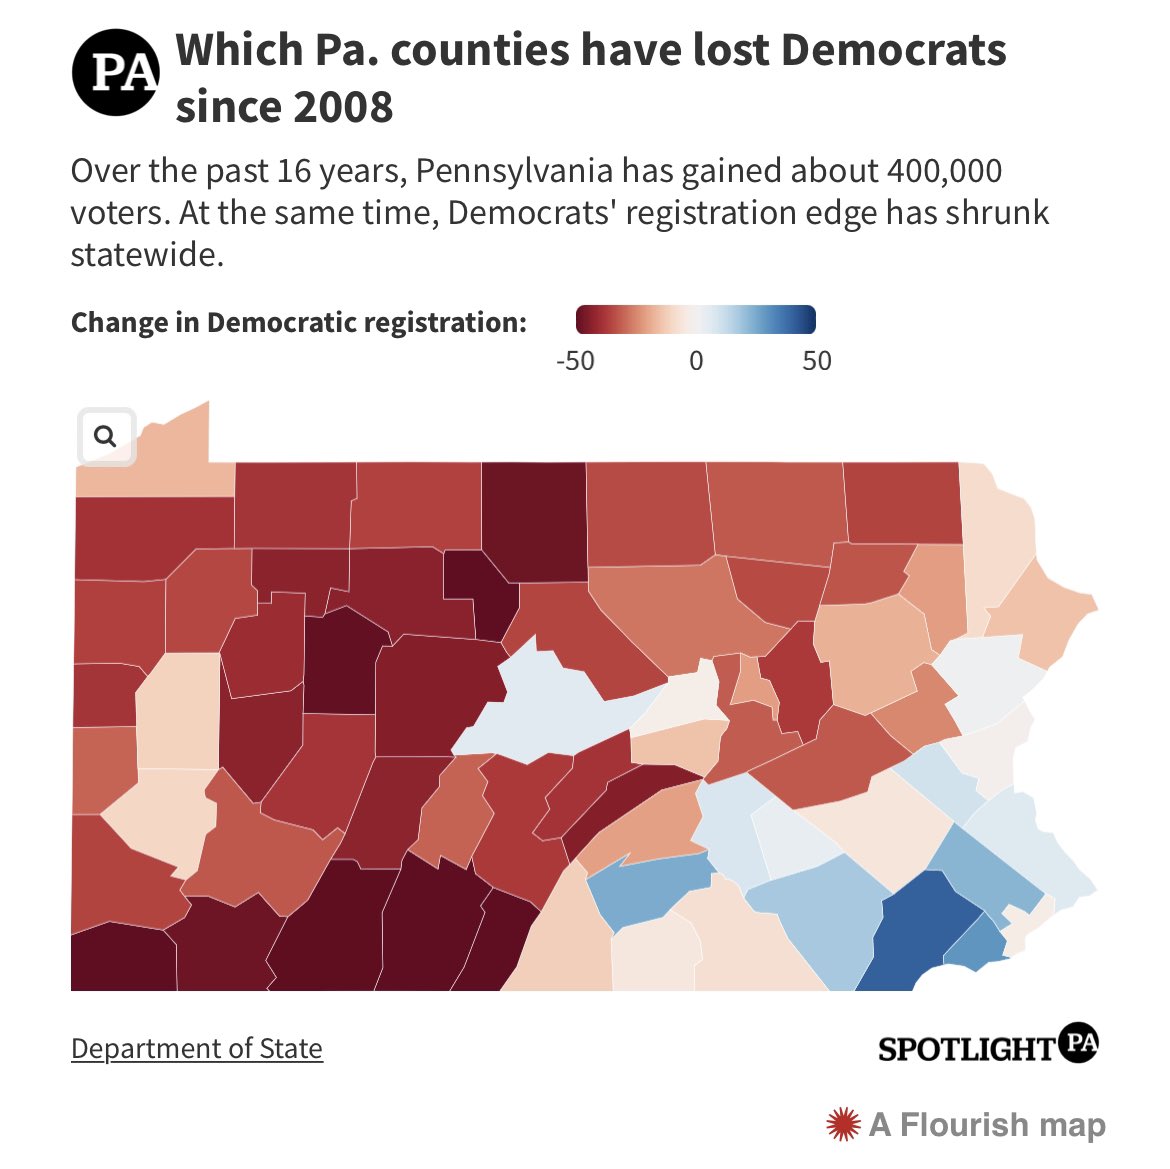 Pennsylvania News “For the first time in at least 16 years, the Democratic and Republican parties in Pennsylvania are within half a million registered voters of one another. “Since 2008, Democrats’ registration edge over Republicans has steadily shrunk — from a 12% advantage…